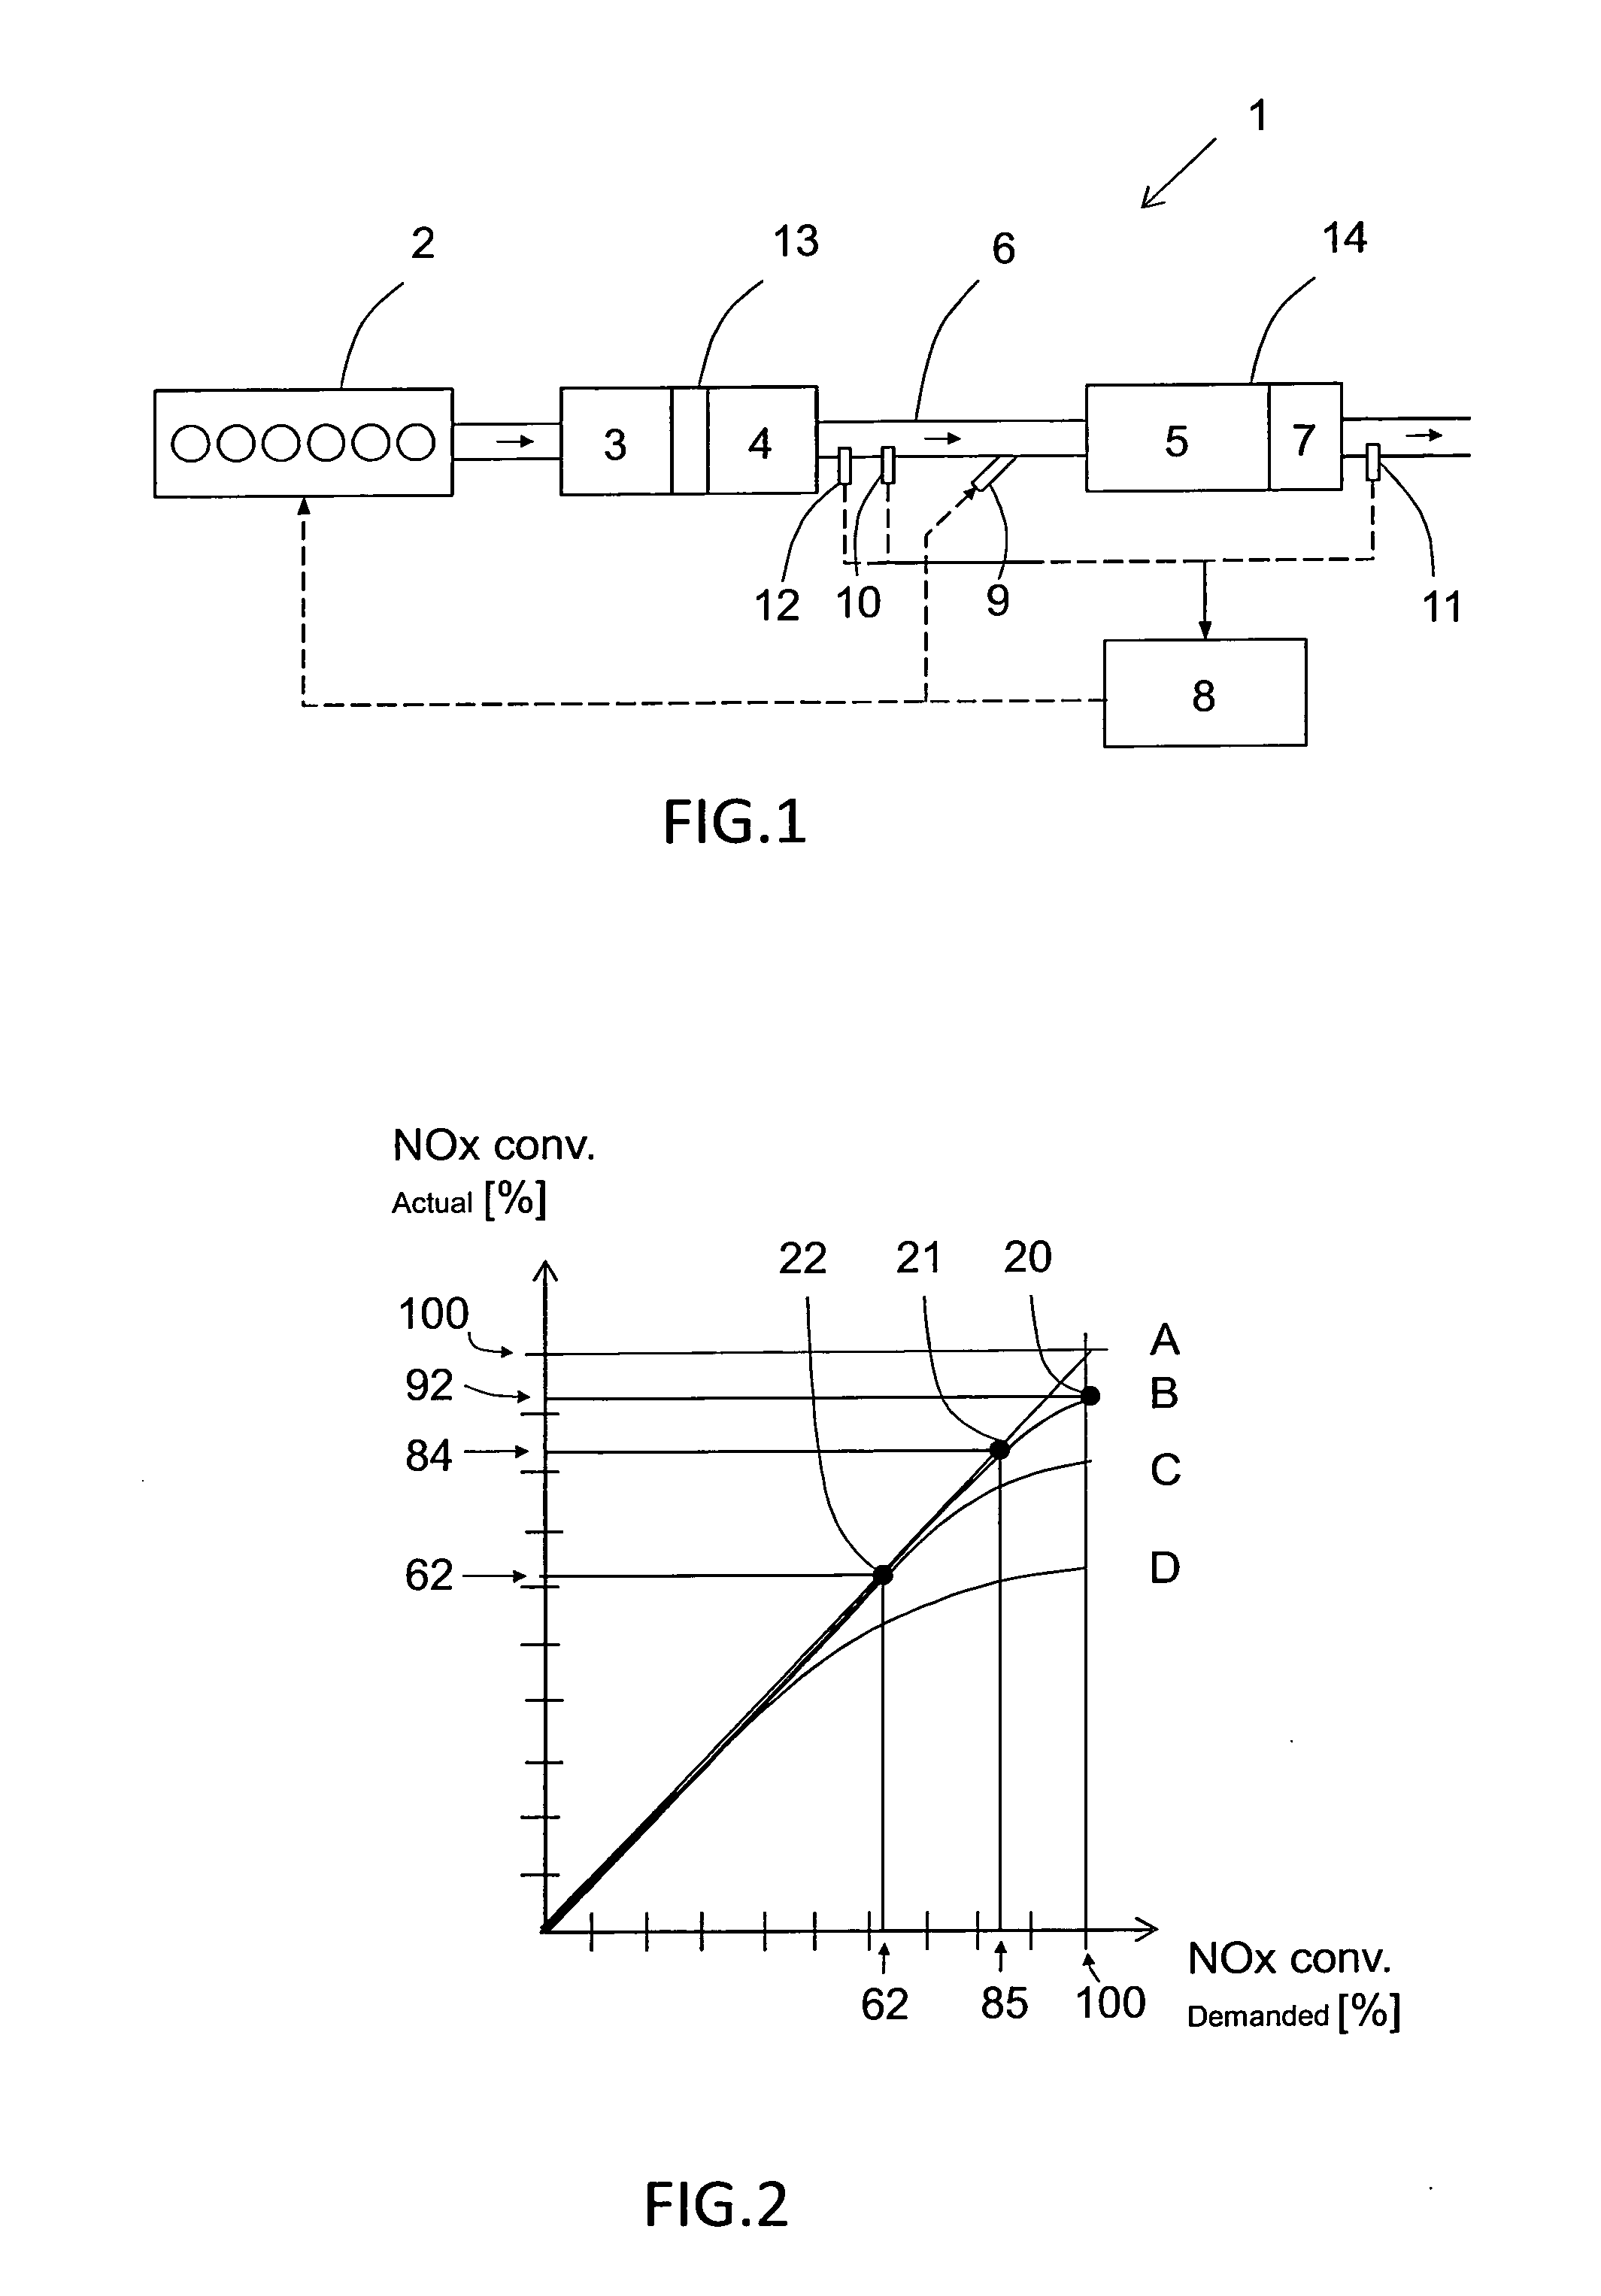 Method and system for estimating reagent quality